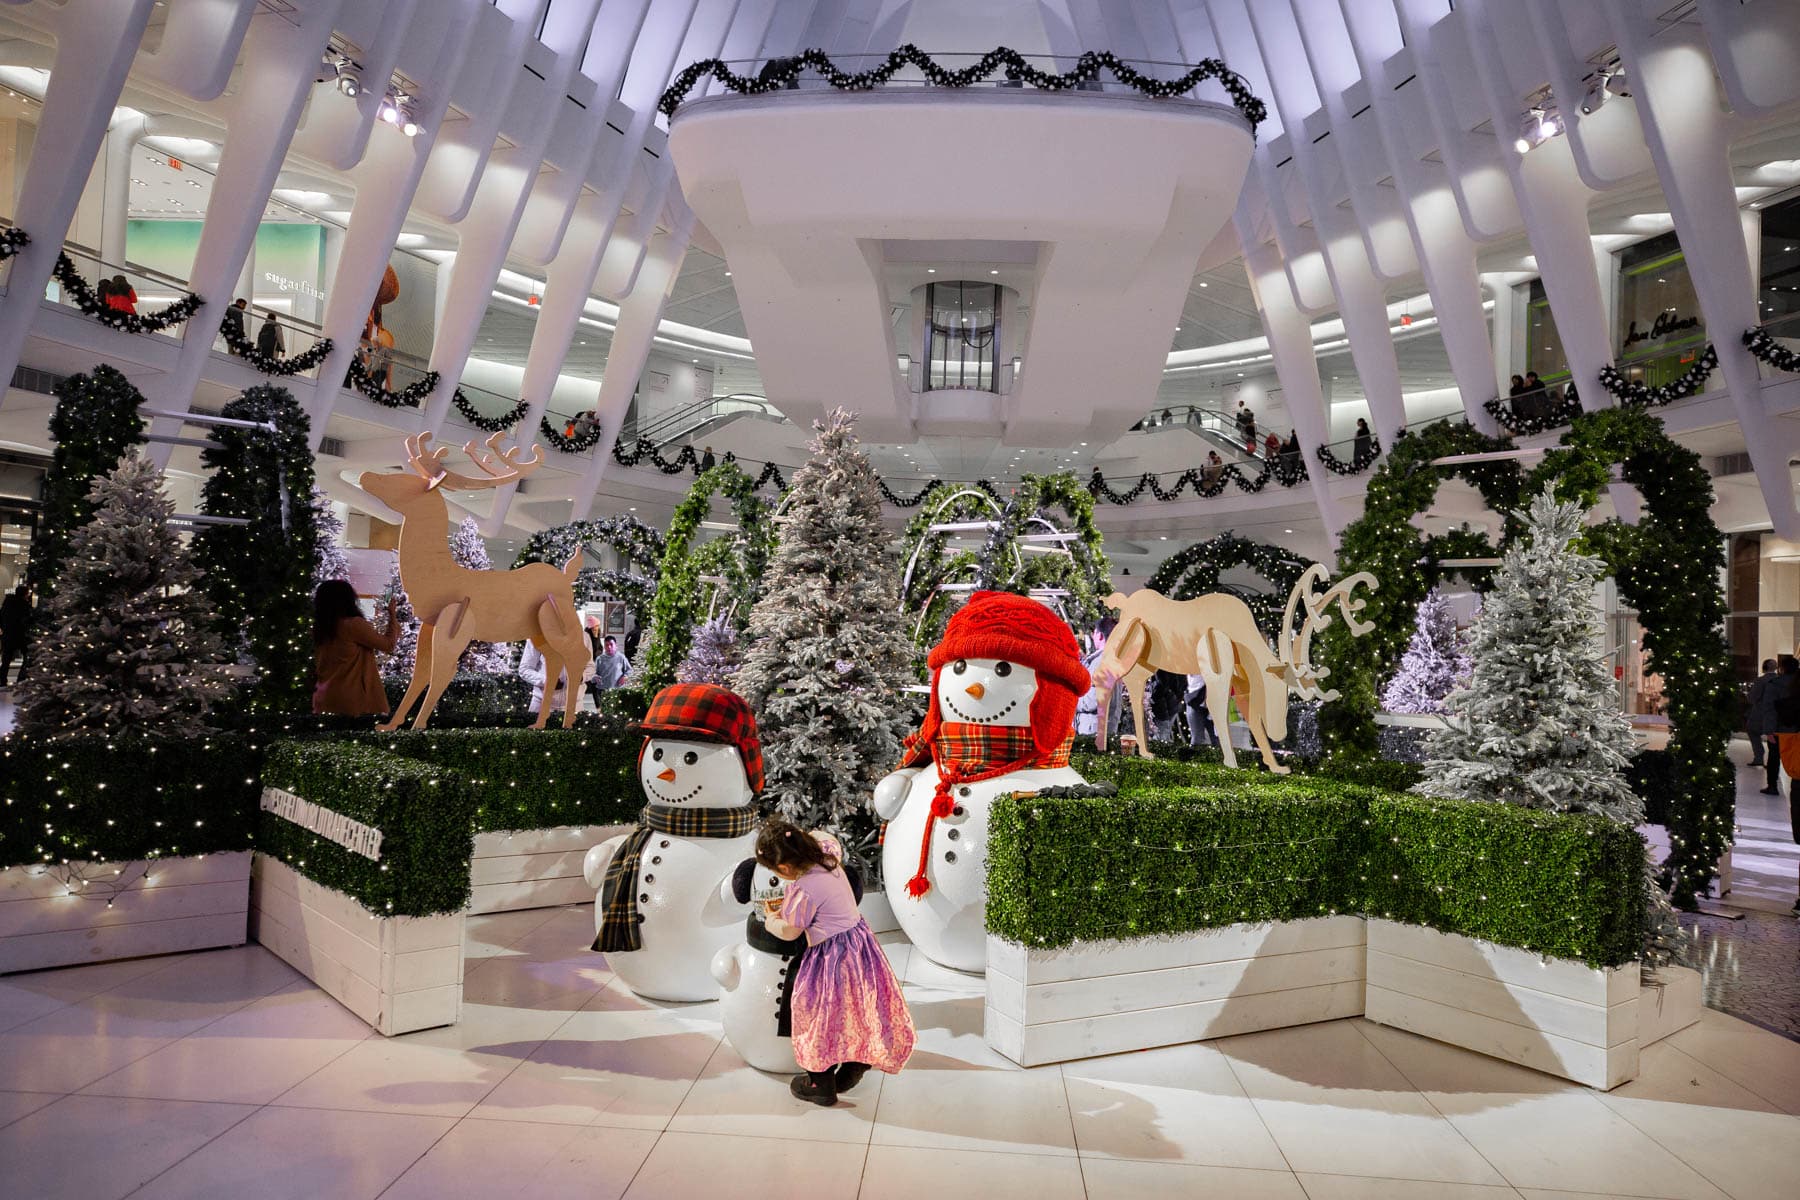 Oculus Mall Christmas Decorations NYC
Things to Do for Christmas in NYC with Kids